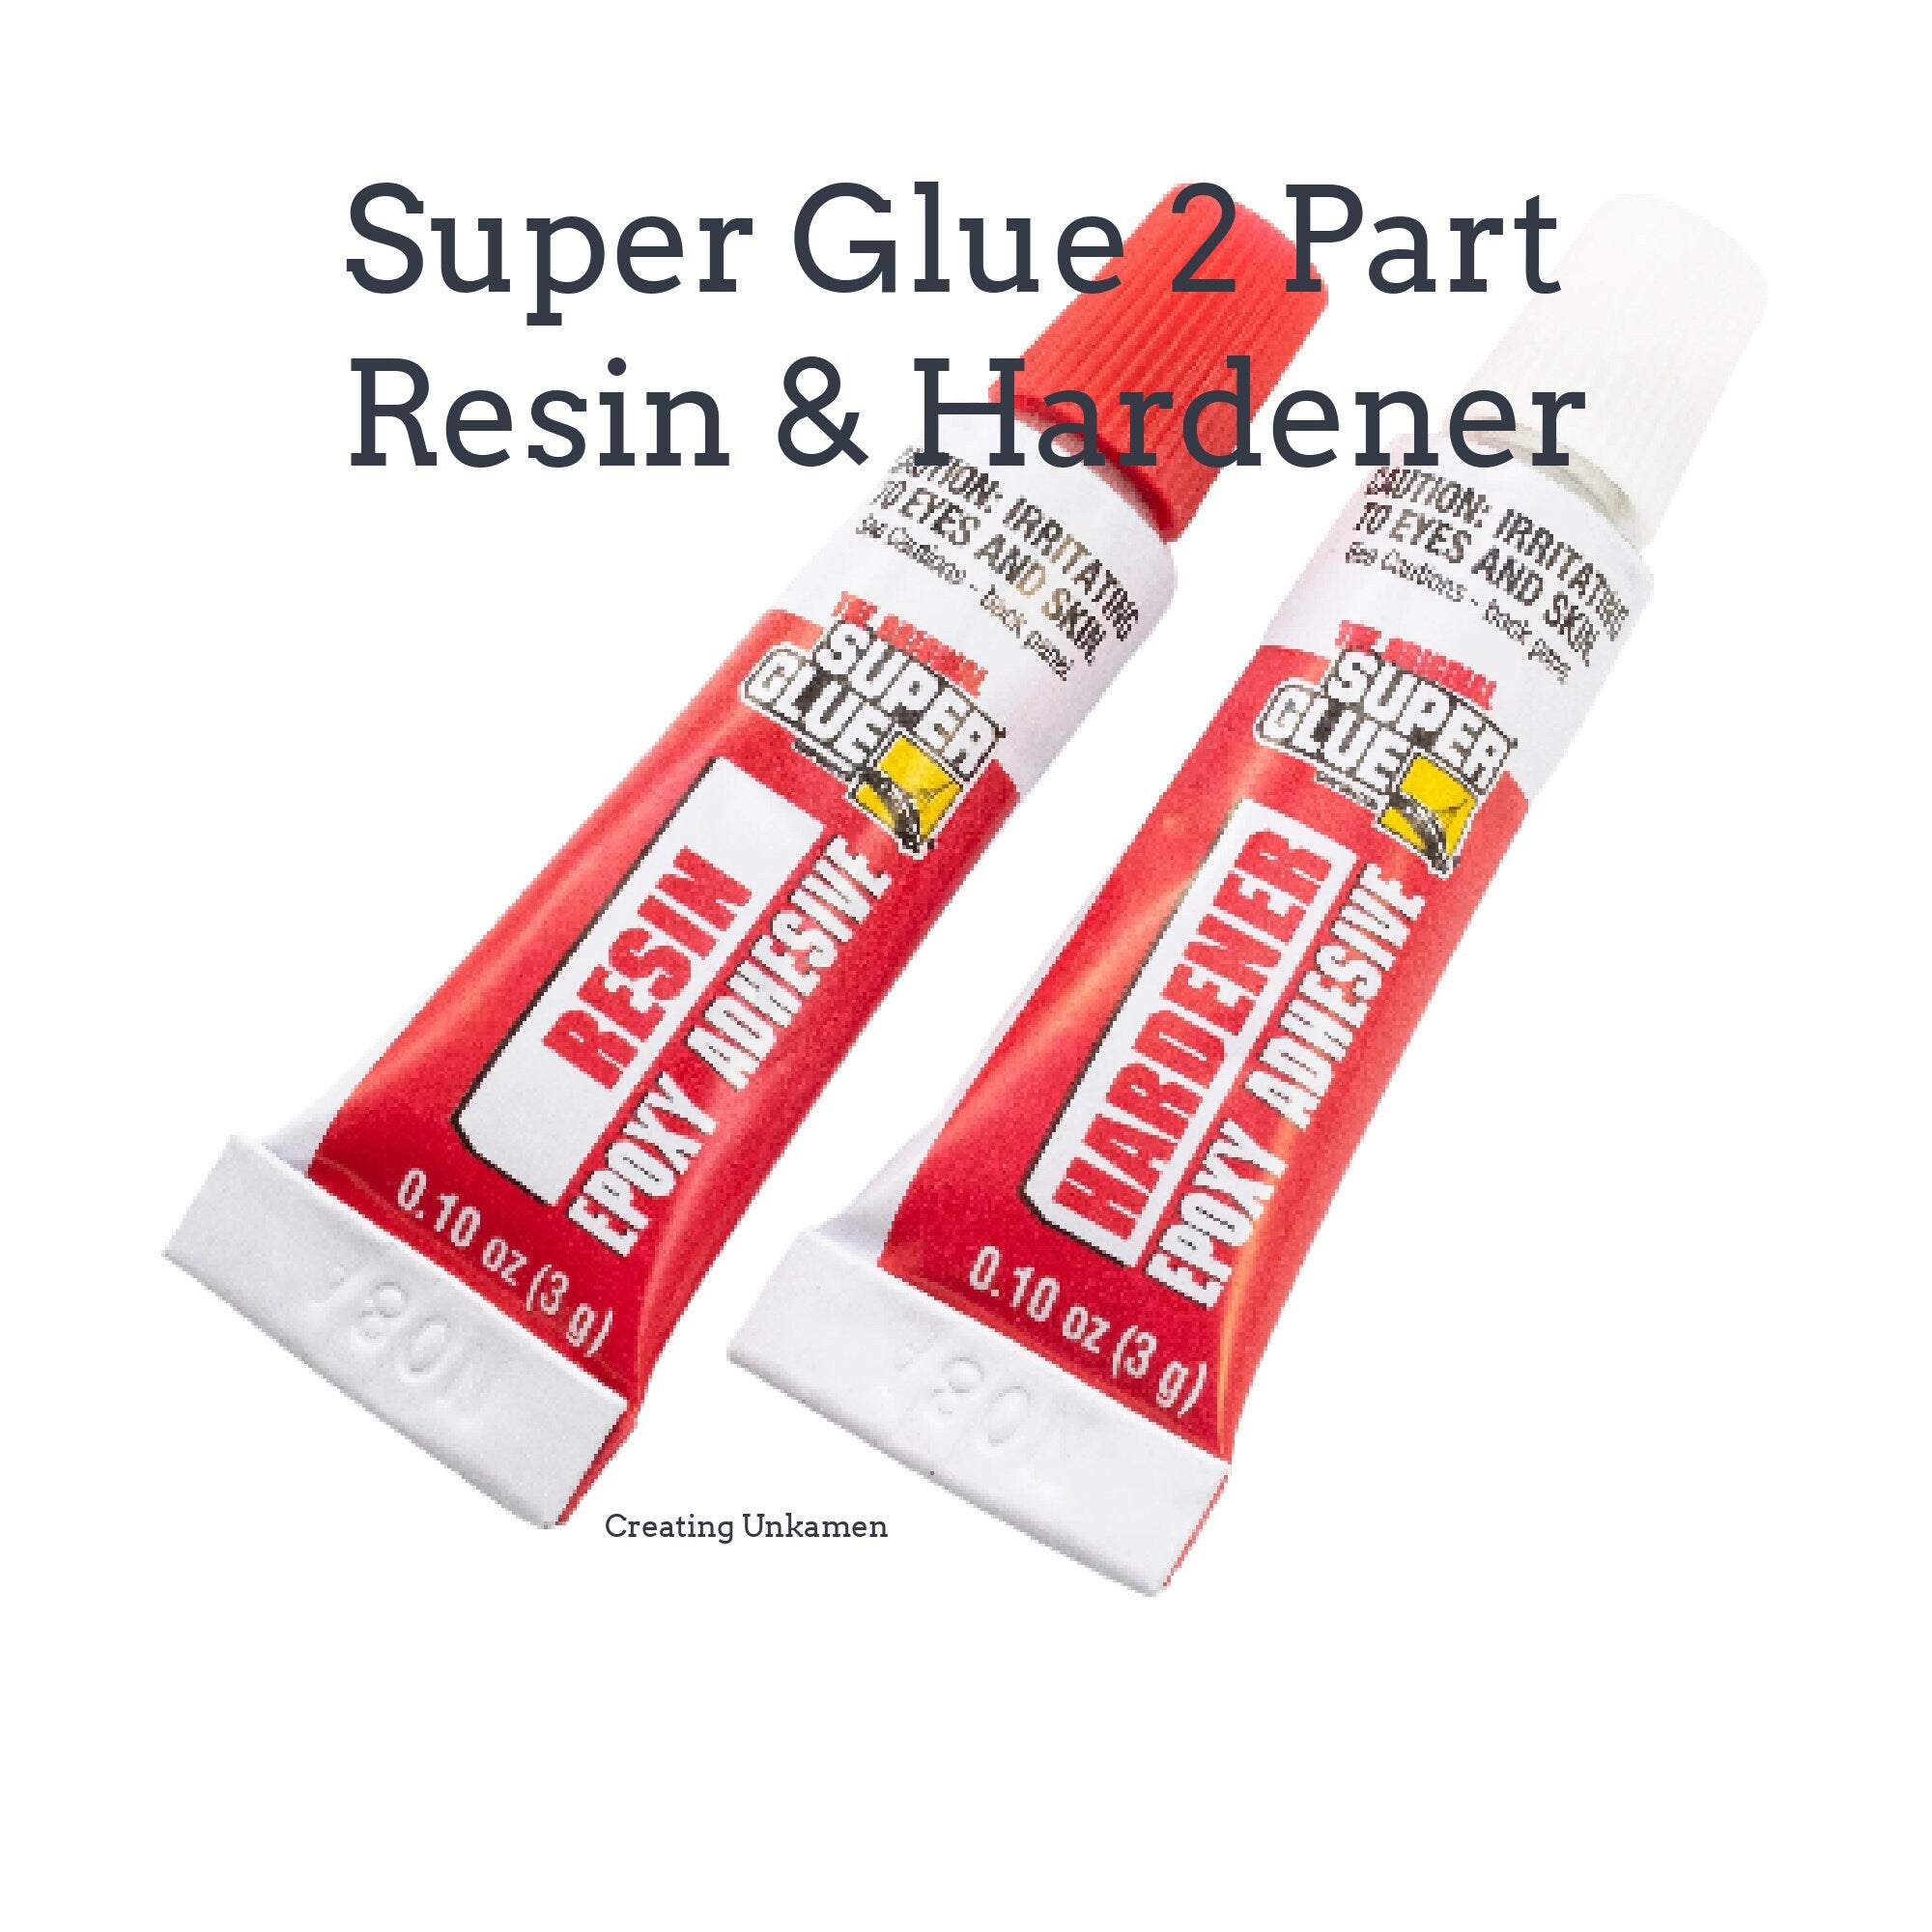 Epoxy Resin Glue 8100M Manufacturers, Suppliers, Factory - Duratec